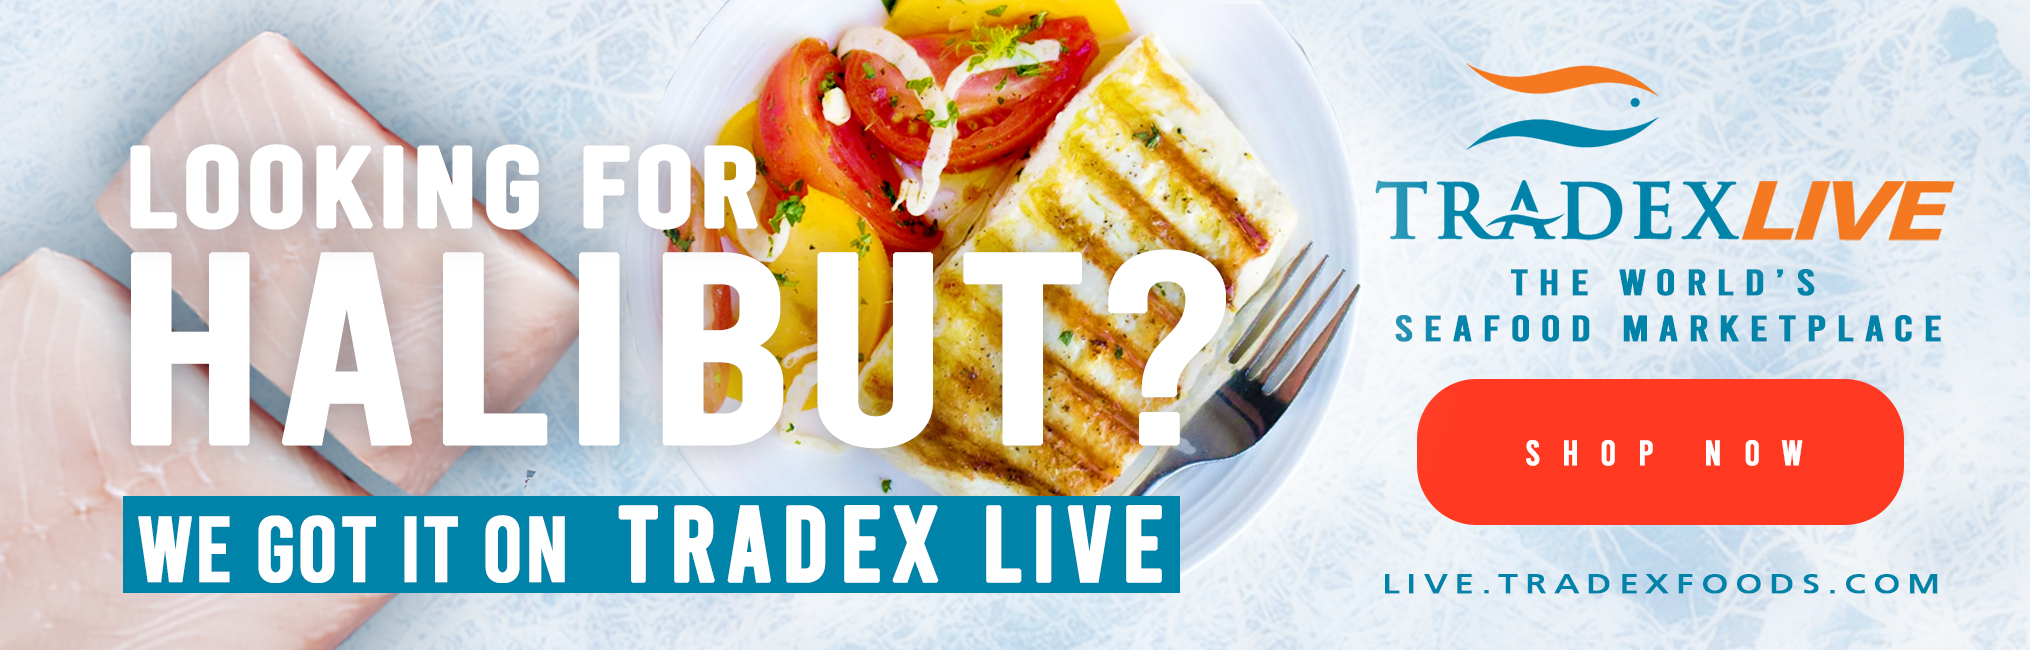 LOOKING FOR HALIBUT? WE GOT IT ON TRADEXLIVE.